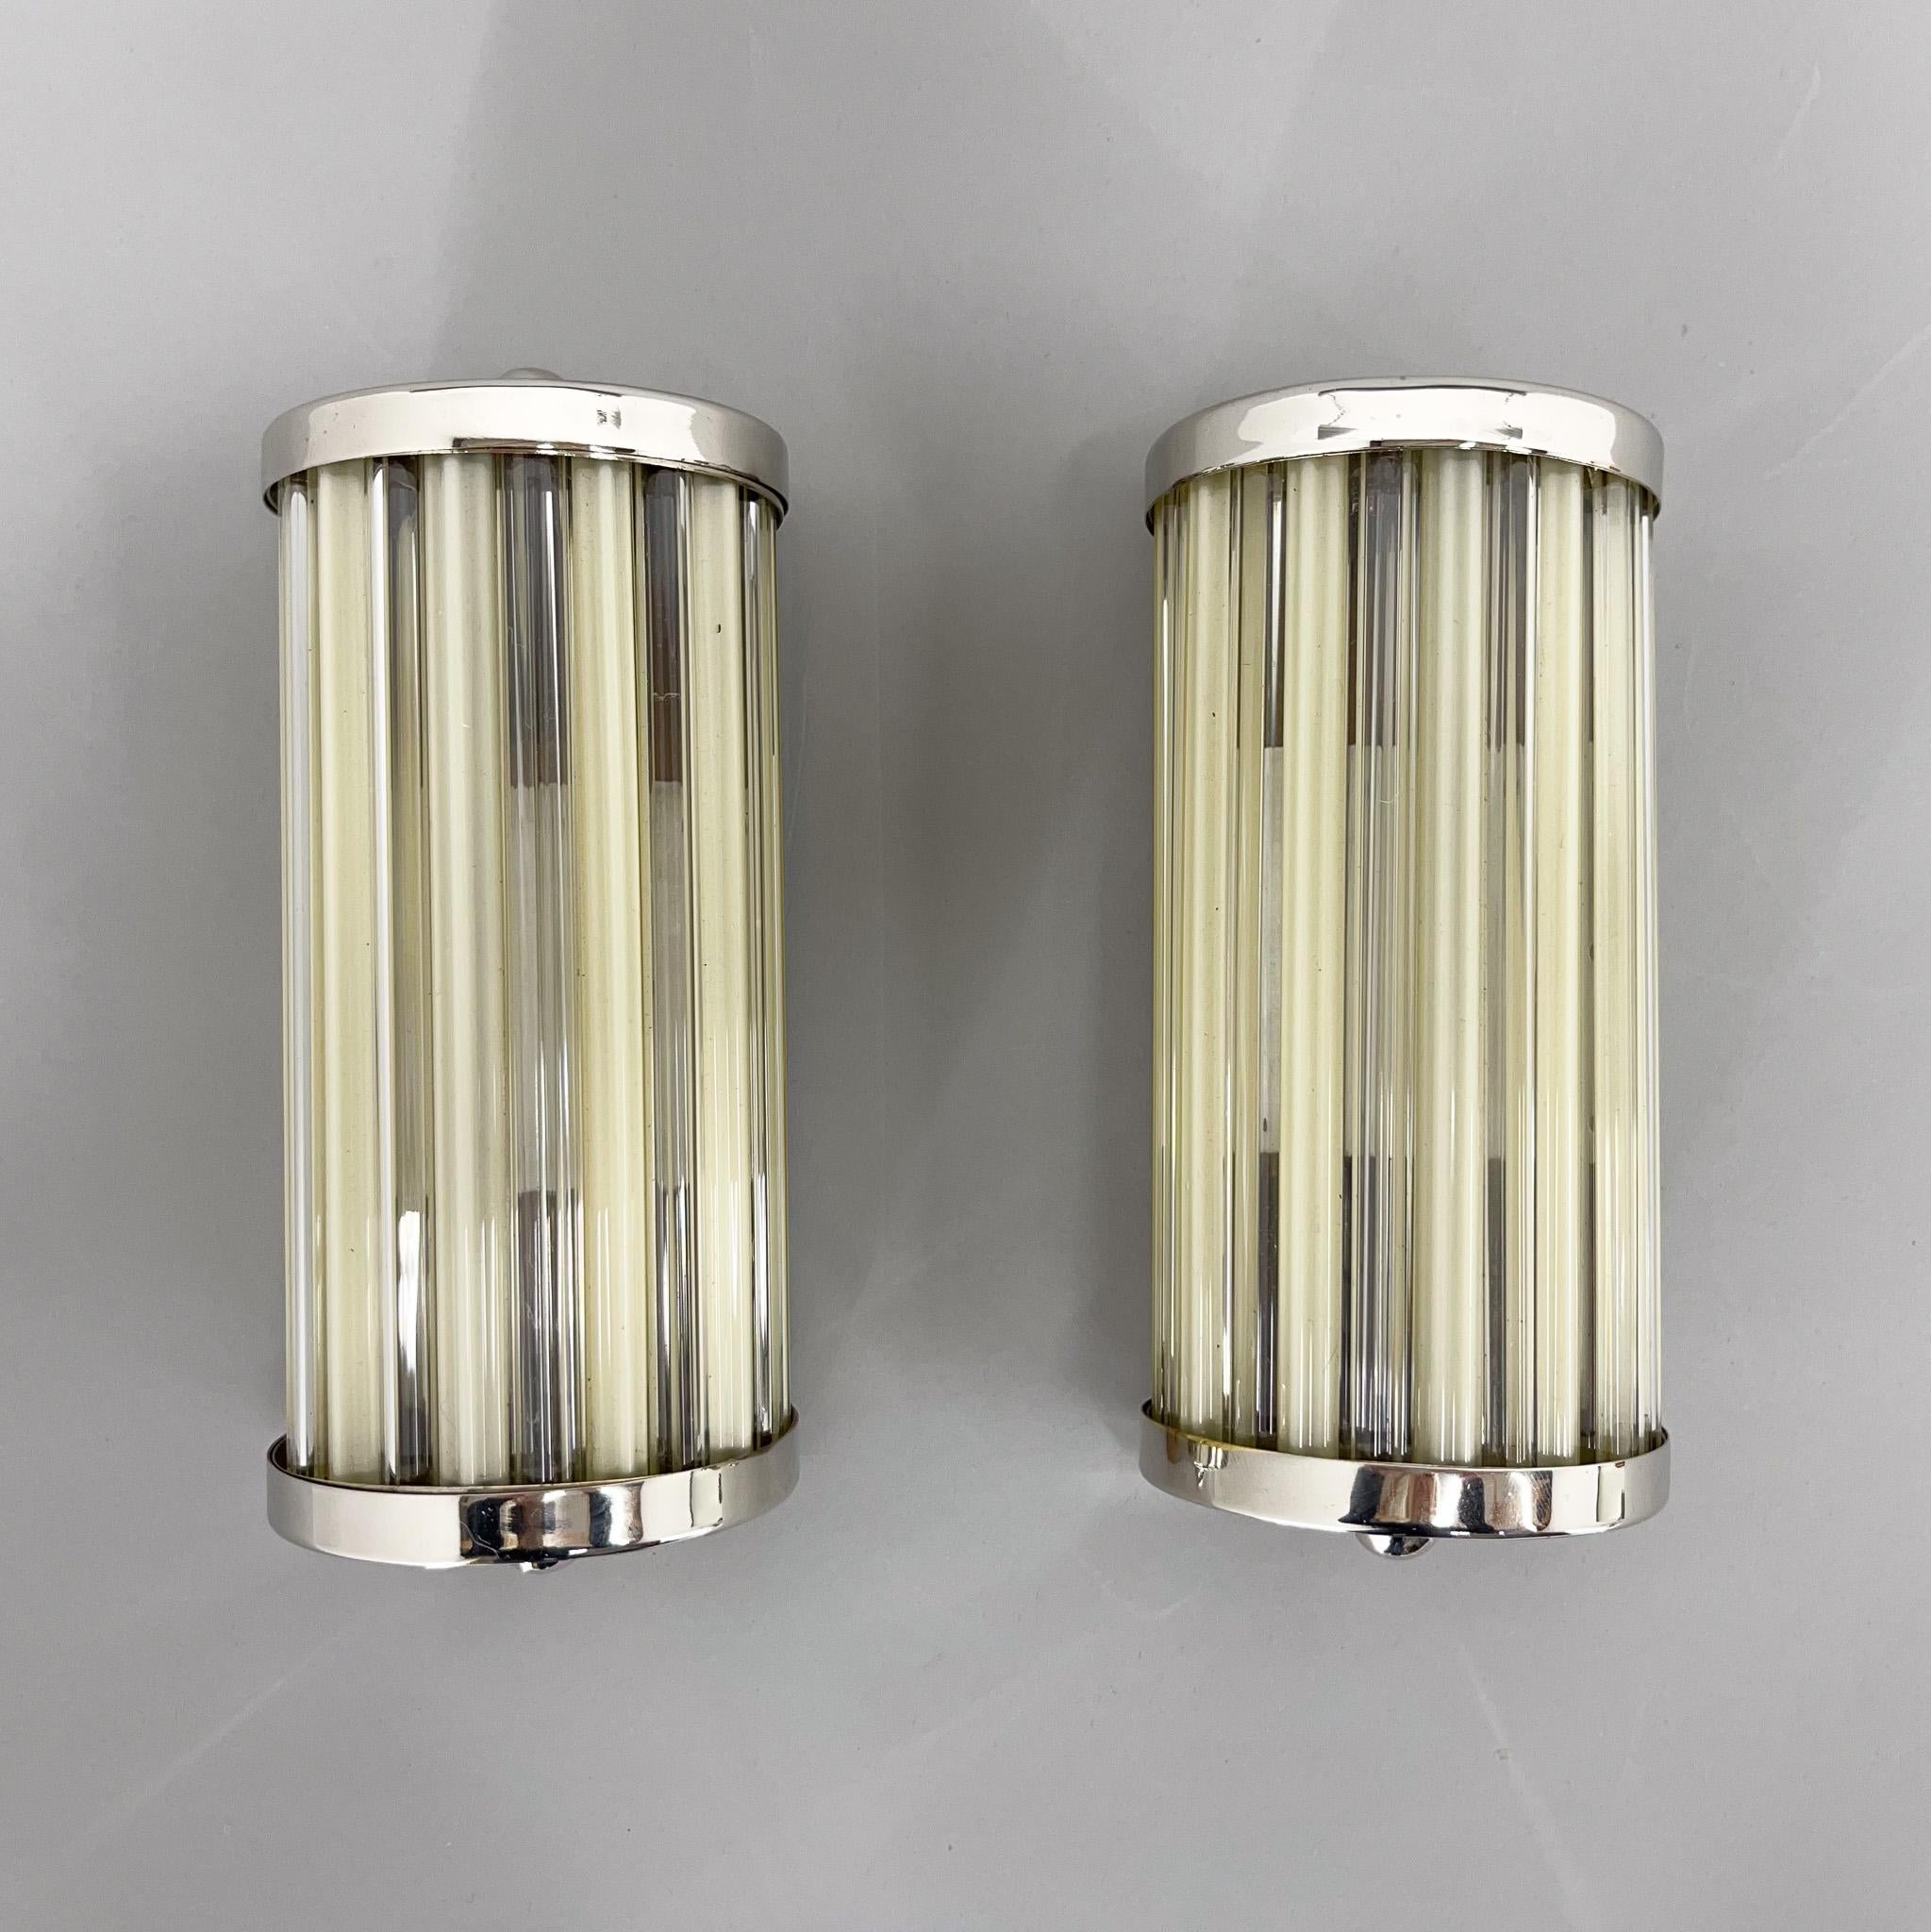 Mid-20th Century Pair of 1940s Rare Italian Chrome & Glass Wall Lamps, Restored